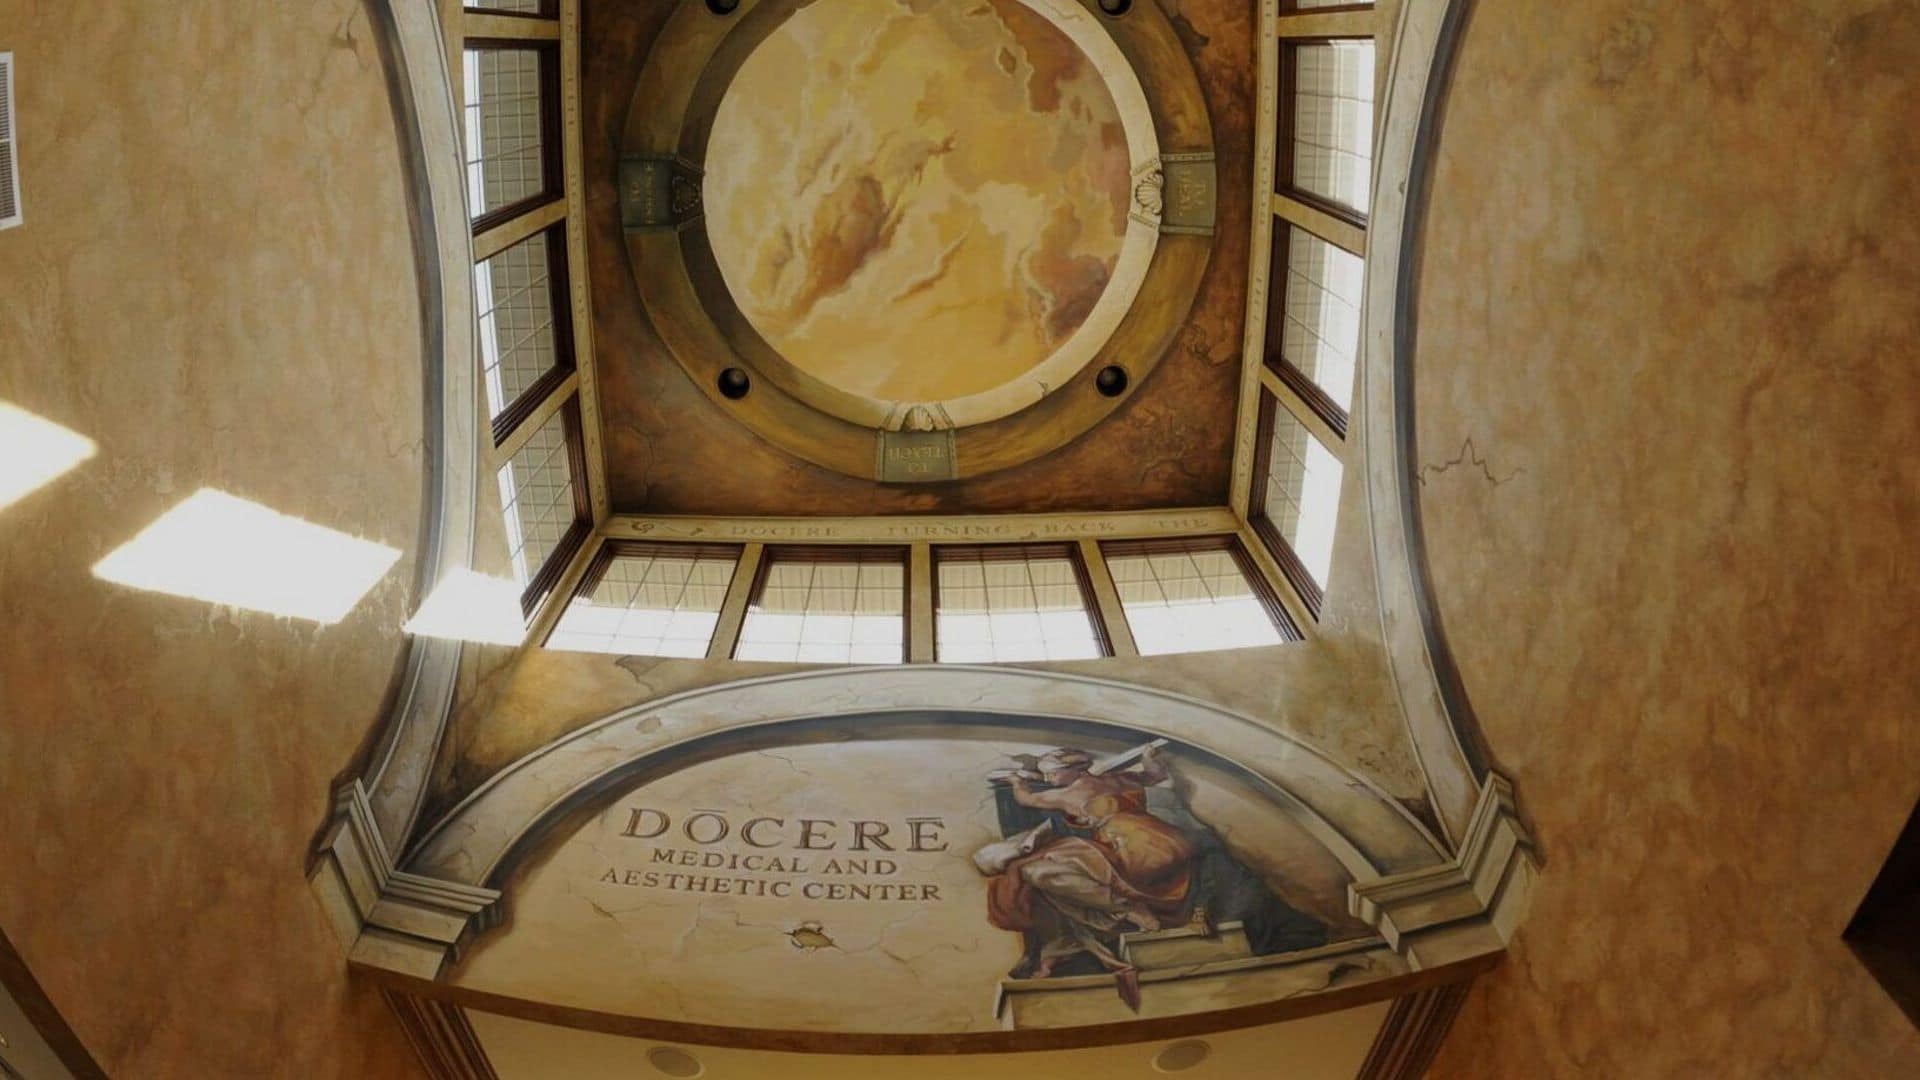 Beautiful entry inside of Docere Medical spa where there is a dome ceiling.